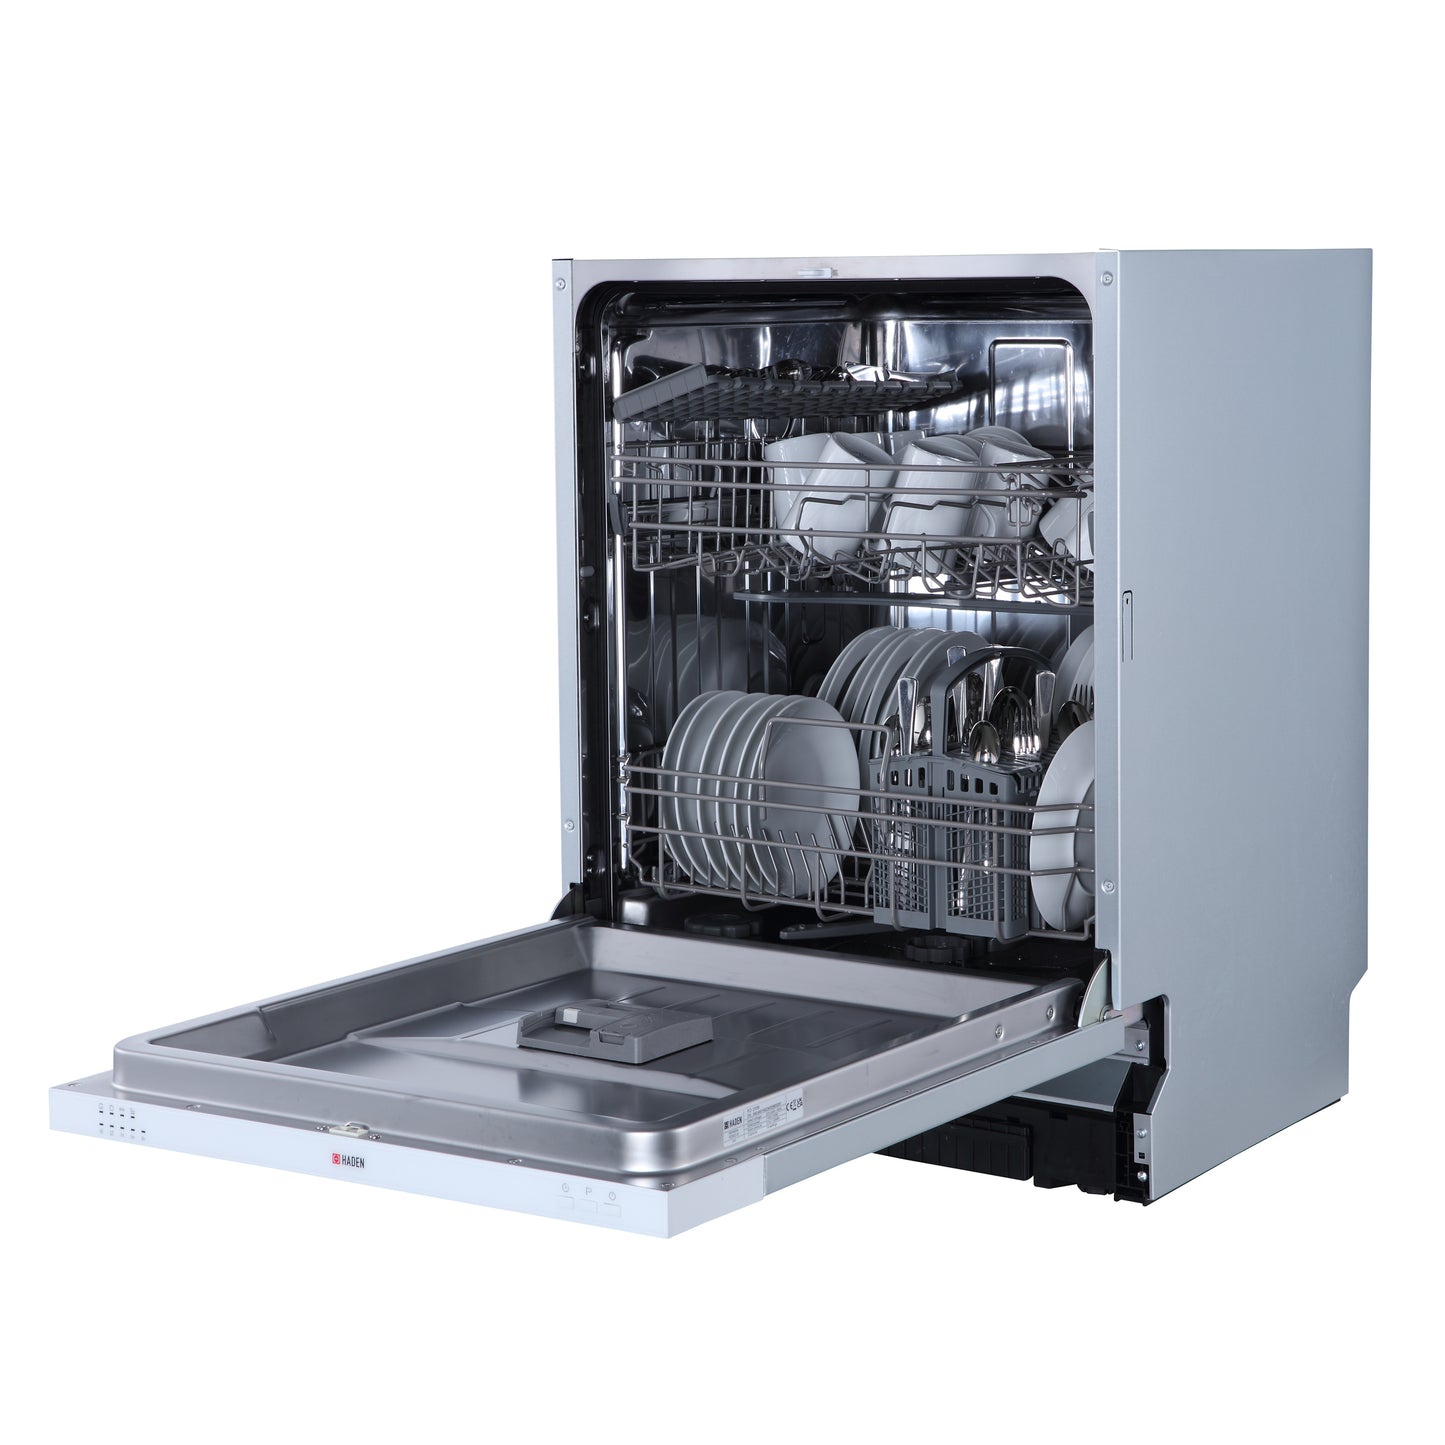 HDI6014 – 60CM INTEGRATED BUILT IN DISHWASHER